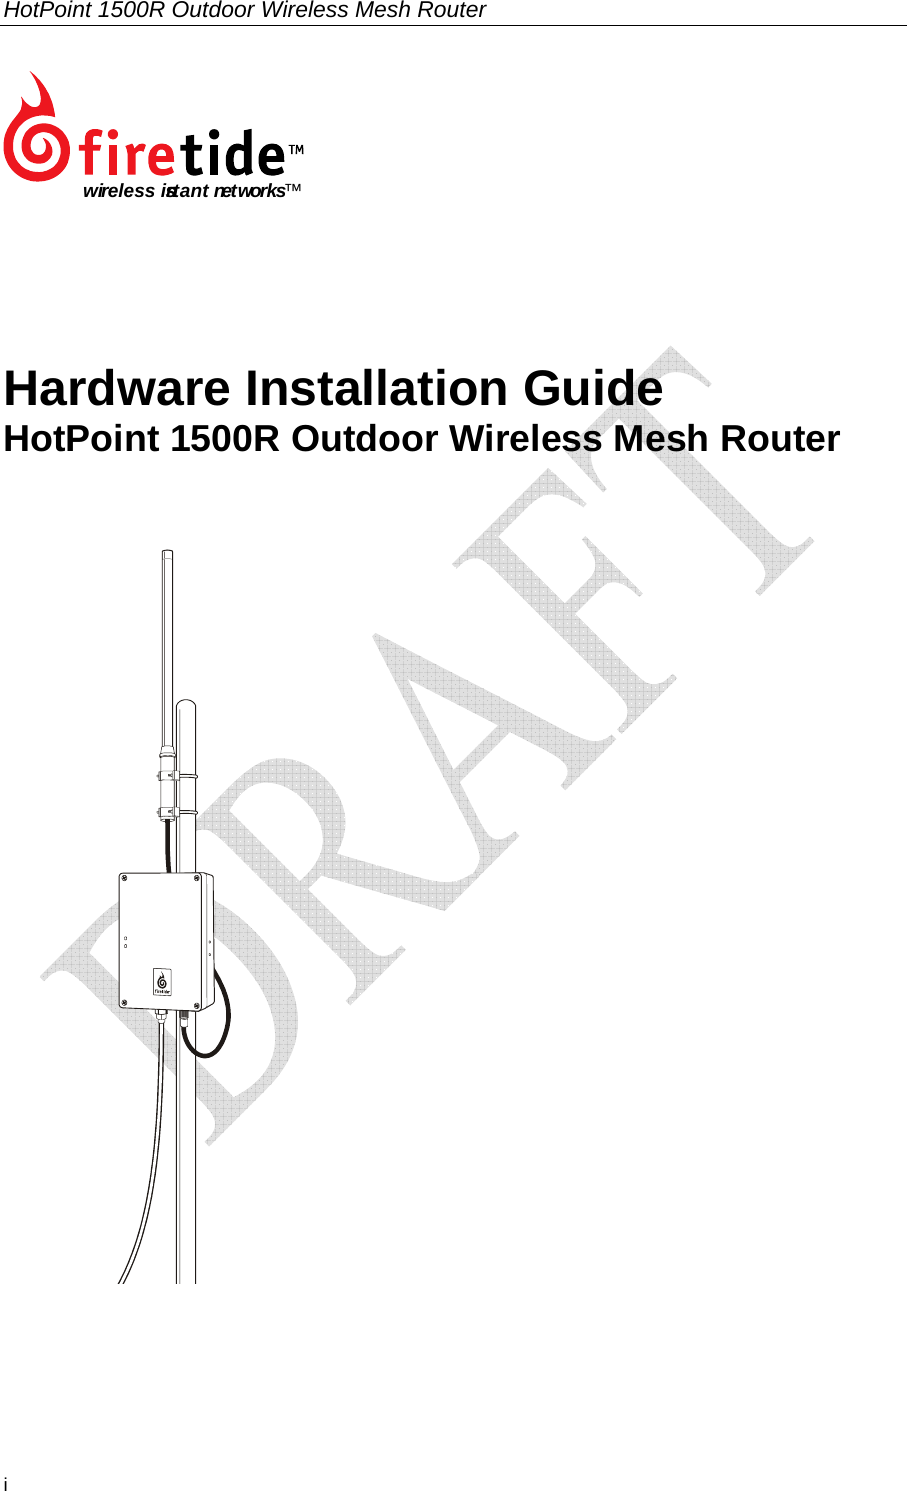 HotPoint 1500R Outdoor Wireless Mesh Router  i             Hardware Installation Guide HotPoint 1500R Outdoor Wireless Mesh Router  wireless instant networks™